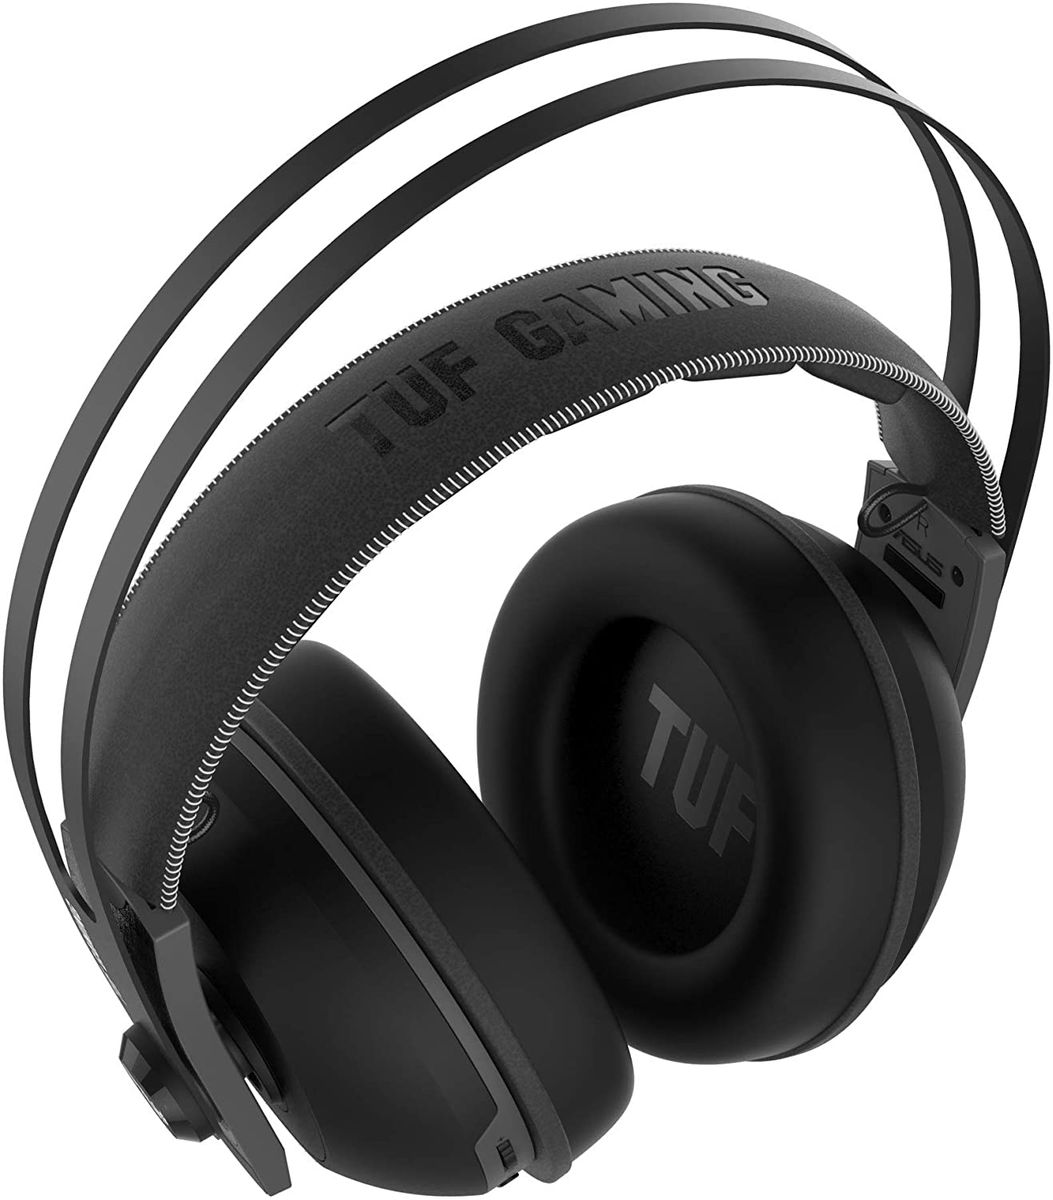 ASUS TUF Gaming H7 Wireless gaming headset for PC, Mac and PlayStation 4 with 2.4GHz wireless connection (Gun Metal)